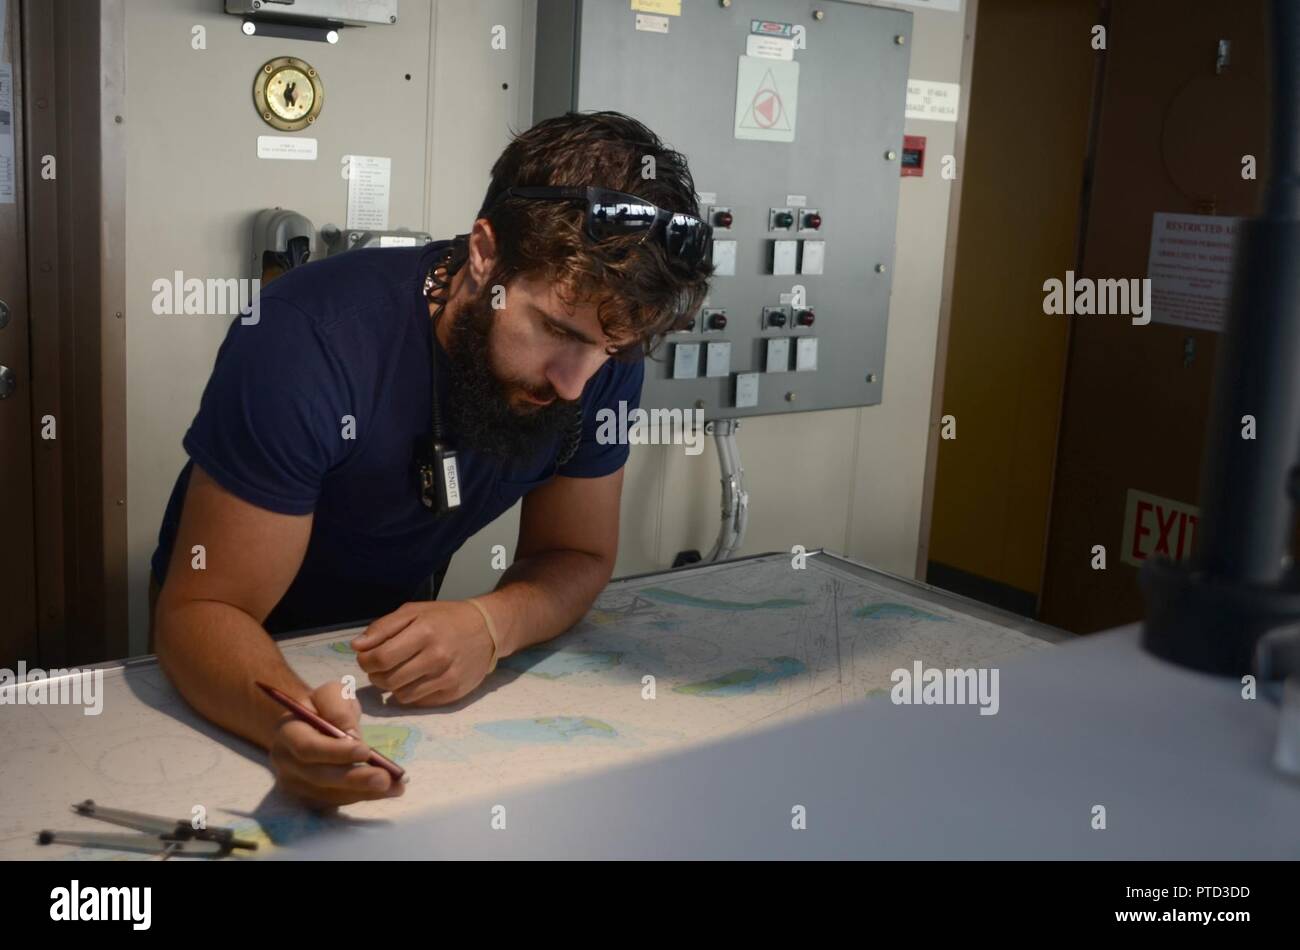 NOUMEA, New Caledonia (July 11, 2017) Aaron Caputo, Navigator/Operator aboard USNS Sacagawea (T-AKE 2), charts a course during sea and anchor detail for the ships outboard journey from New Caledonia during Koa Moana 17, July 11. Koa Moana 17 is designed to improve theater security, and conduct aw enforcement and infantry training in the Pacific region in order to enhance interoperability with partner nations. Stock Photo